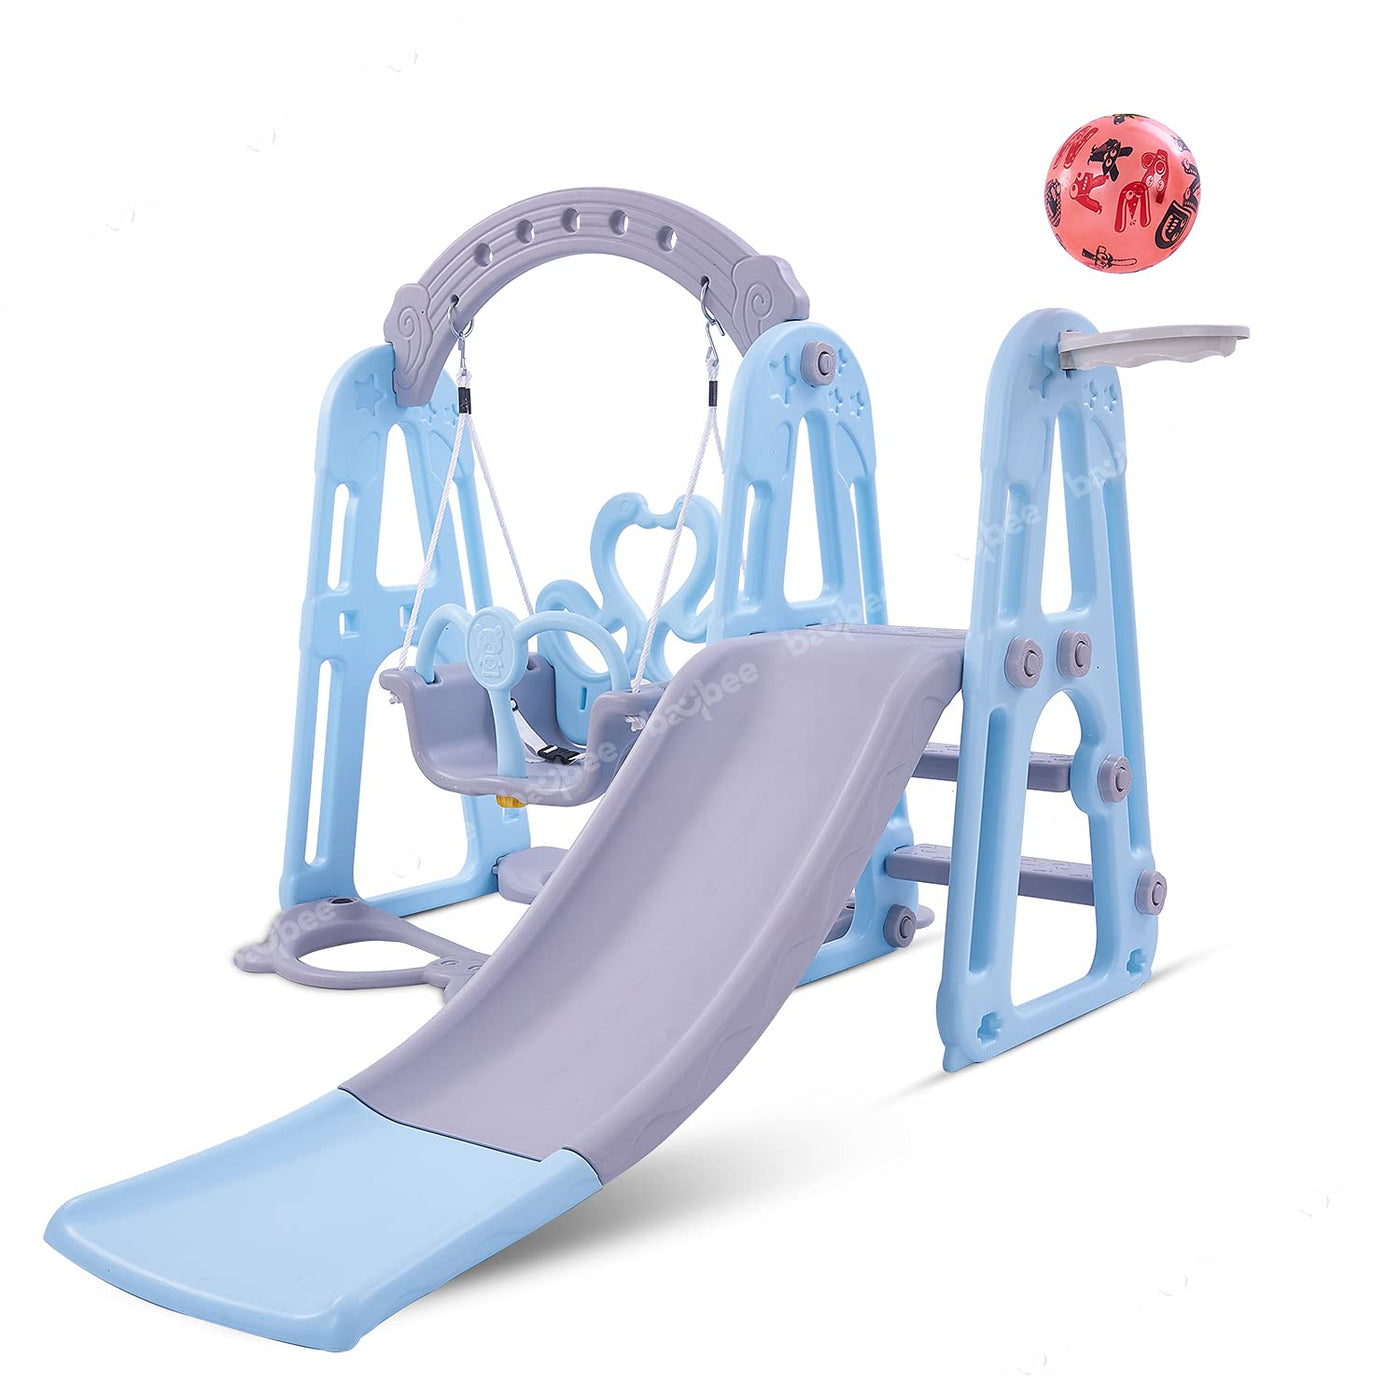 Baybee Twinkle 4 in 1 Toddlers Slider and Swing Basket Ball set